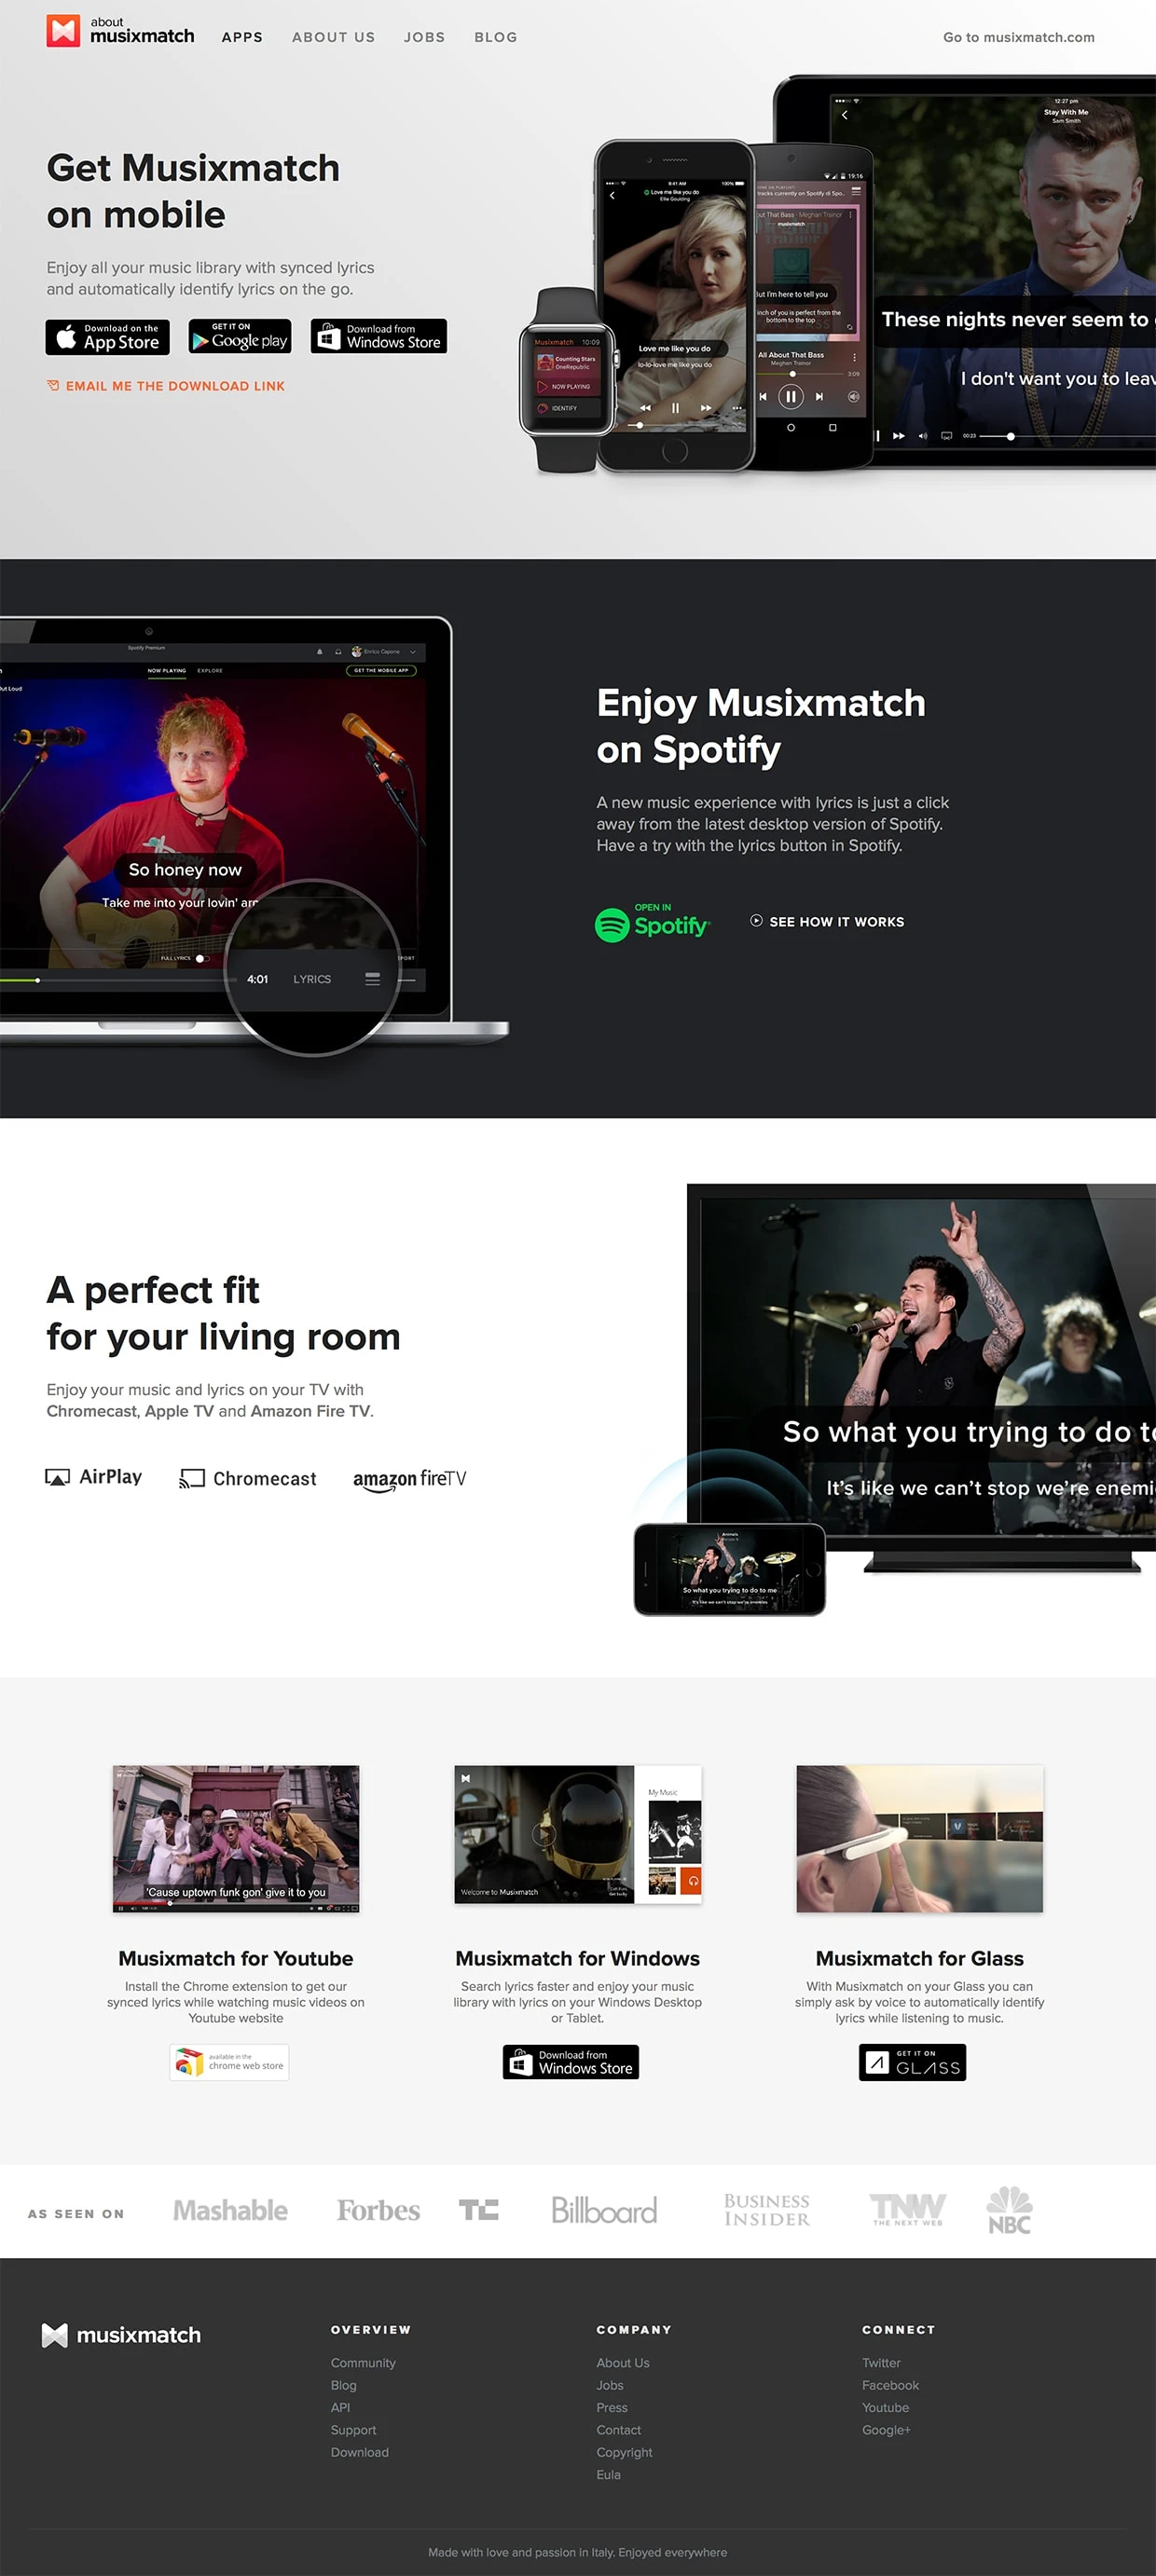 Musixmatch Apps Landing Page Example: Musixmatch is the World's Largest Lyrics Catalog available on mobile and desktop